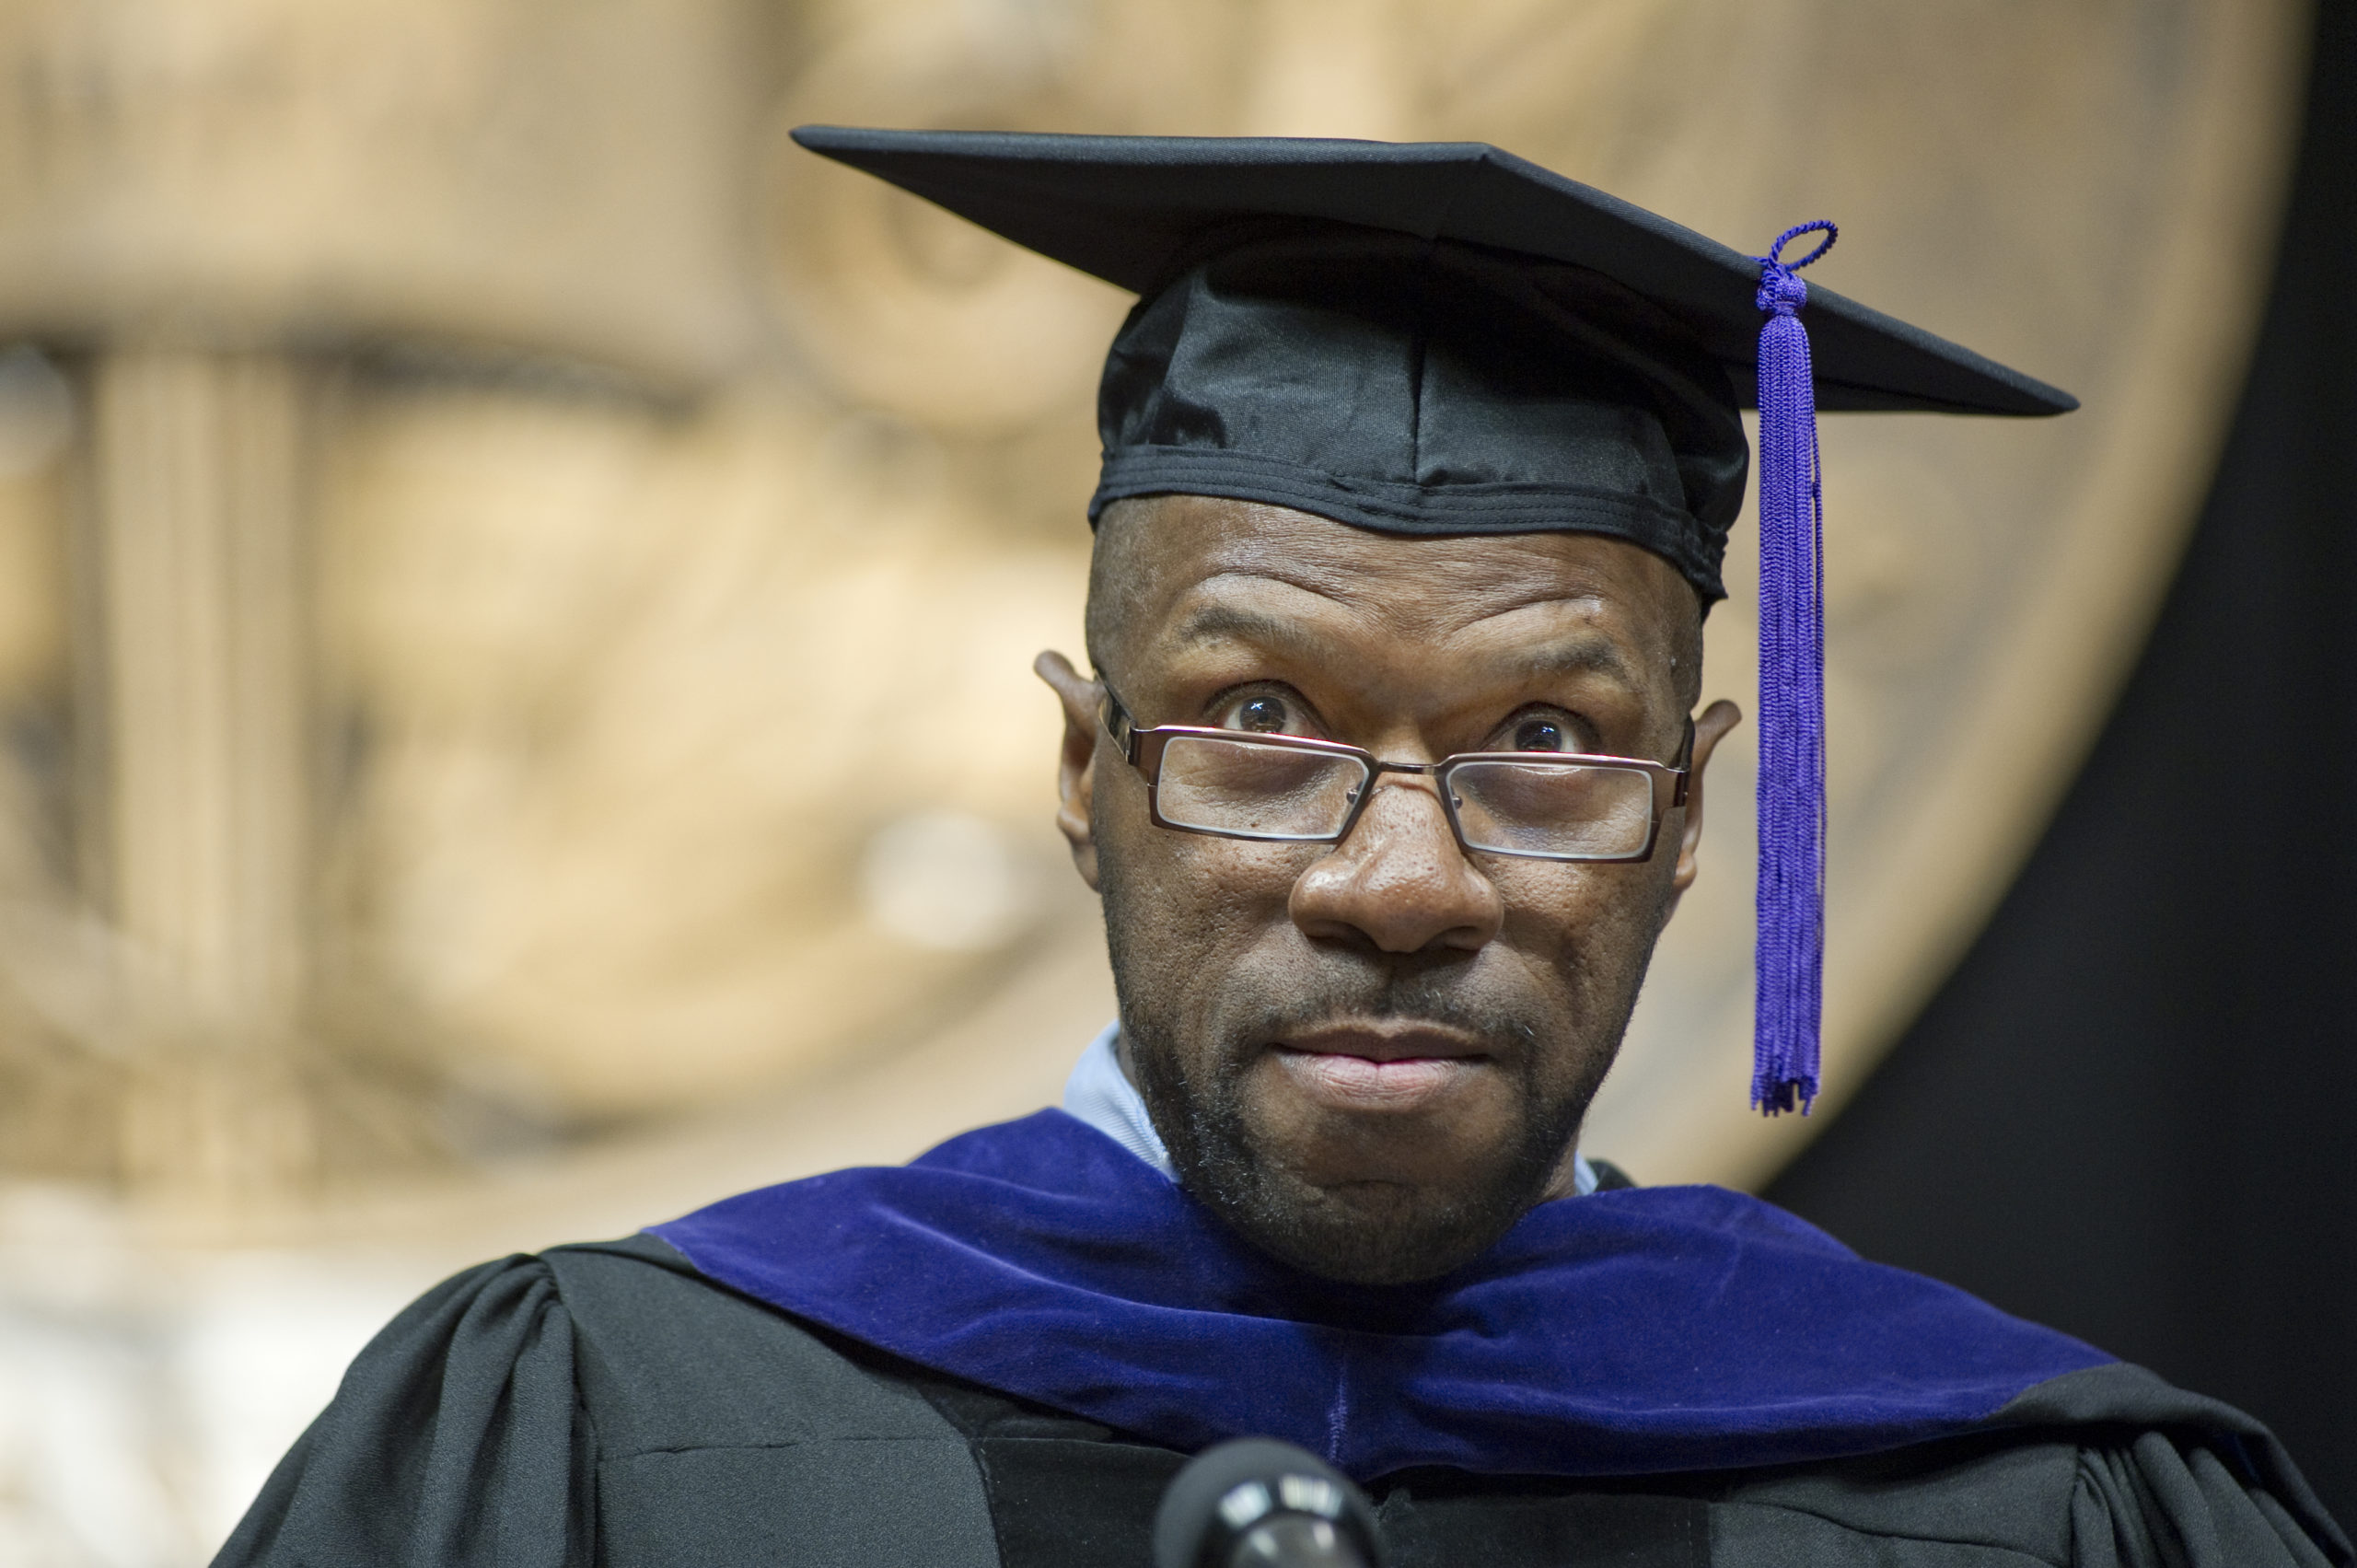 Professor James Hackney Jr. was selected by the class to deliver the faculty address.